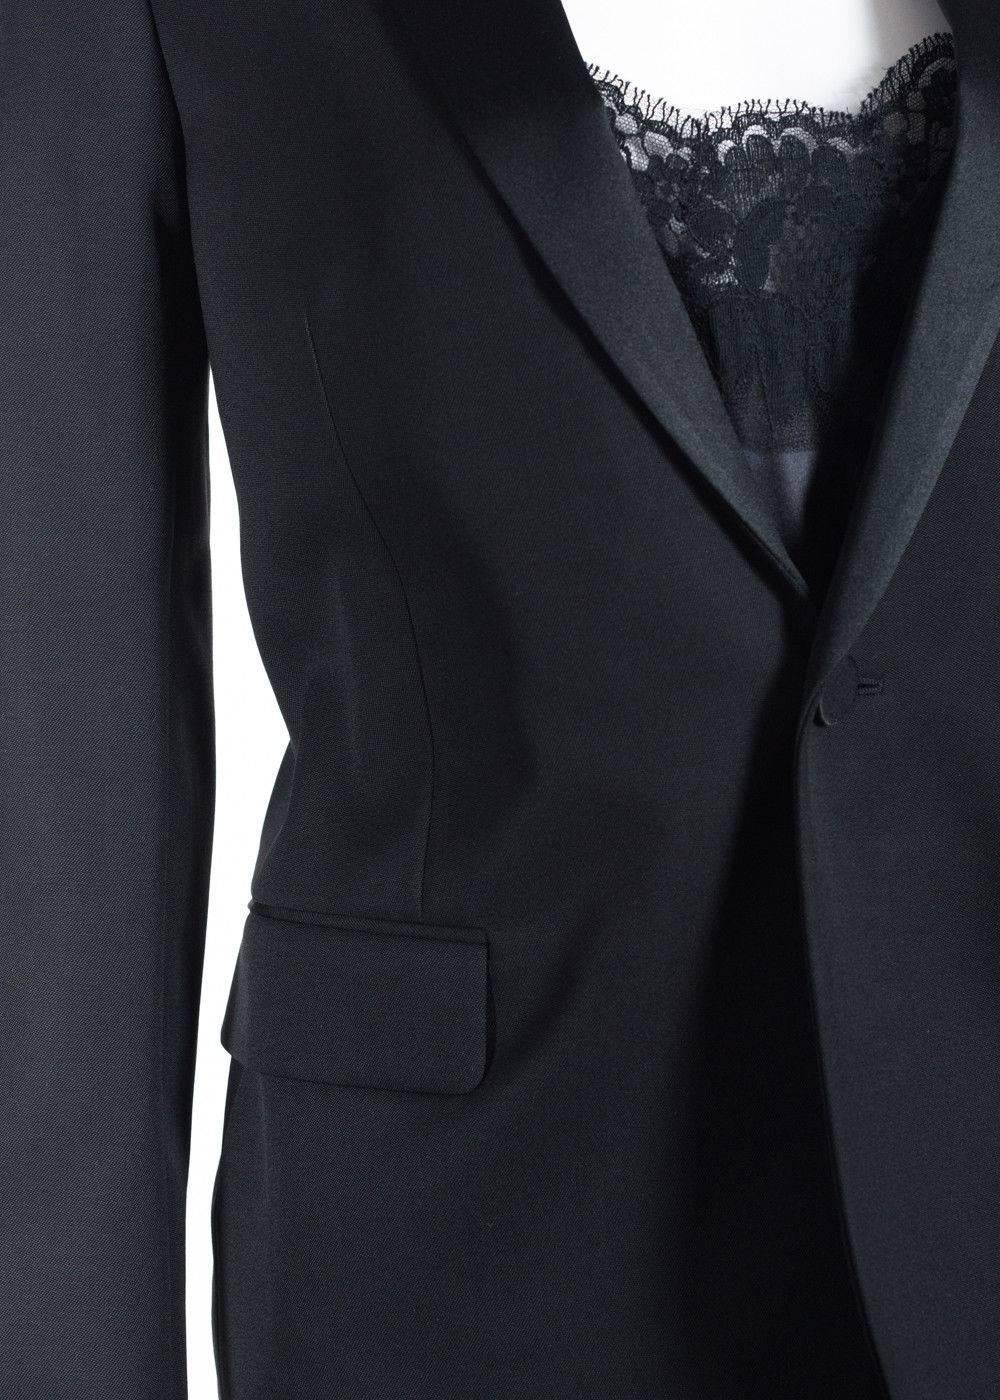 Brand New With Tags
Retails Online and In-stores for $3490
Size EUR 38 / US 6 Fits True to Size


Top your ensemble off with the unforgettable Saint Laurent Tuxedo Jacket. This amazingly tailored jacket is made off rich wool crepe and silk for the